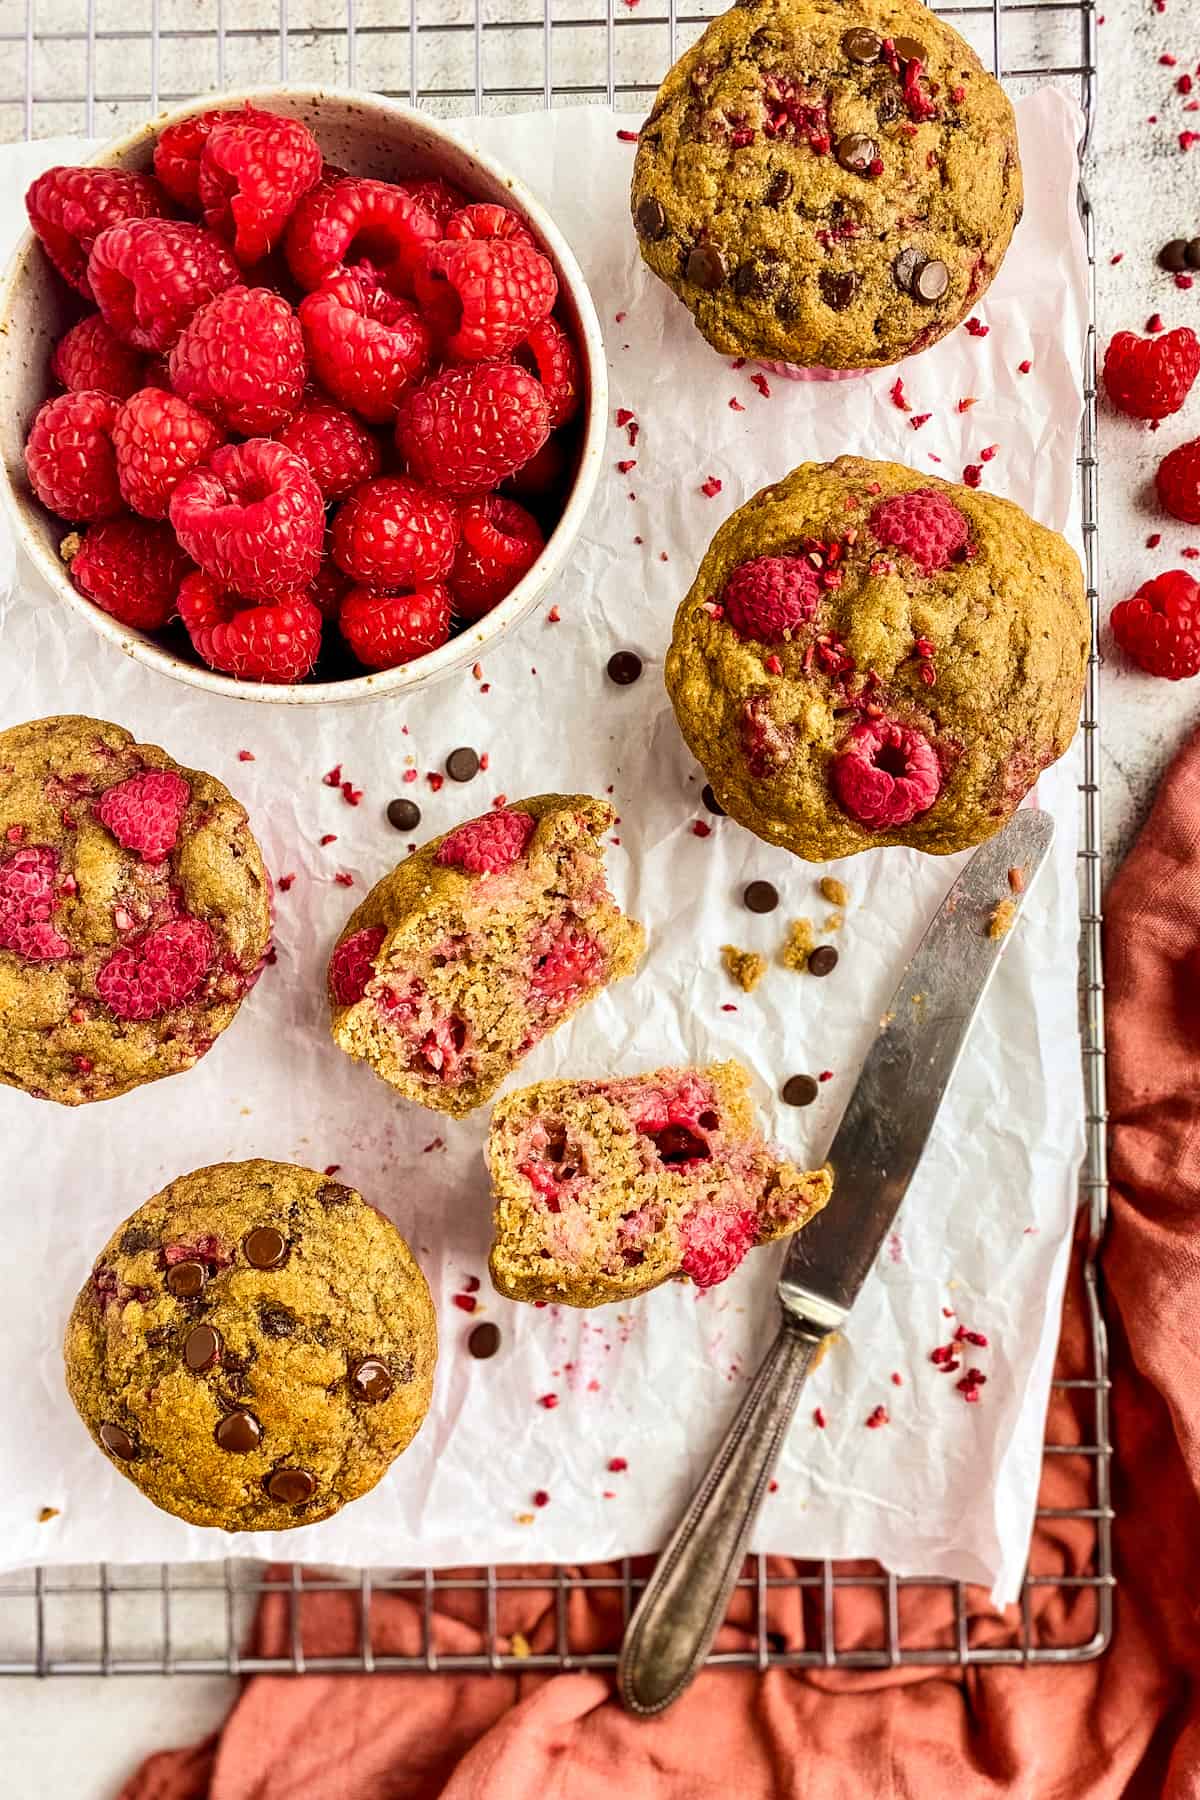 Raspberry muffins on a drying rack with a bowl of raspberries.